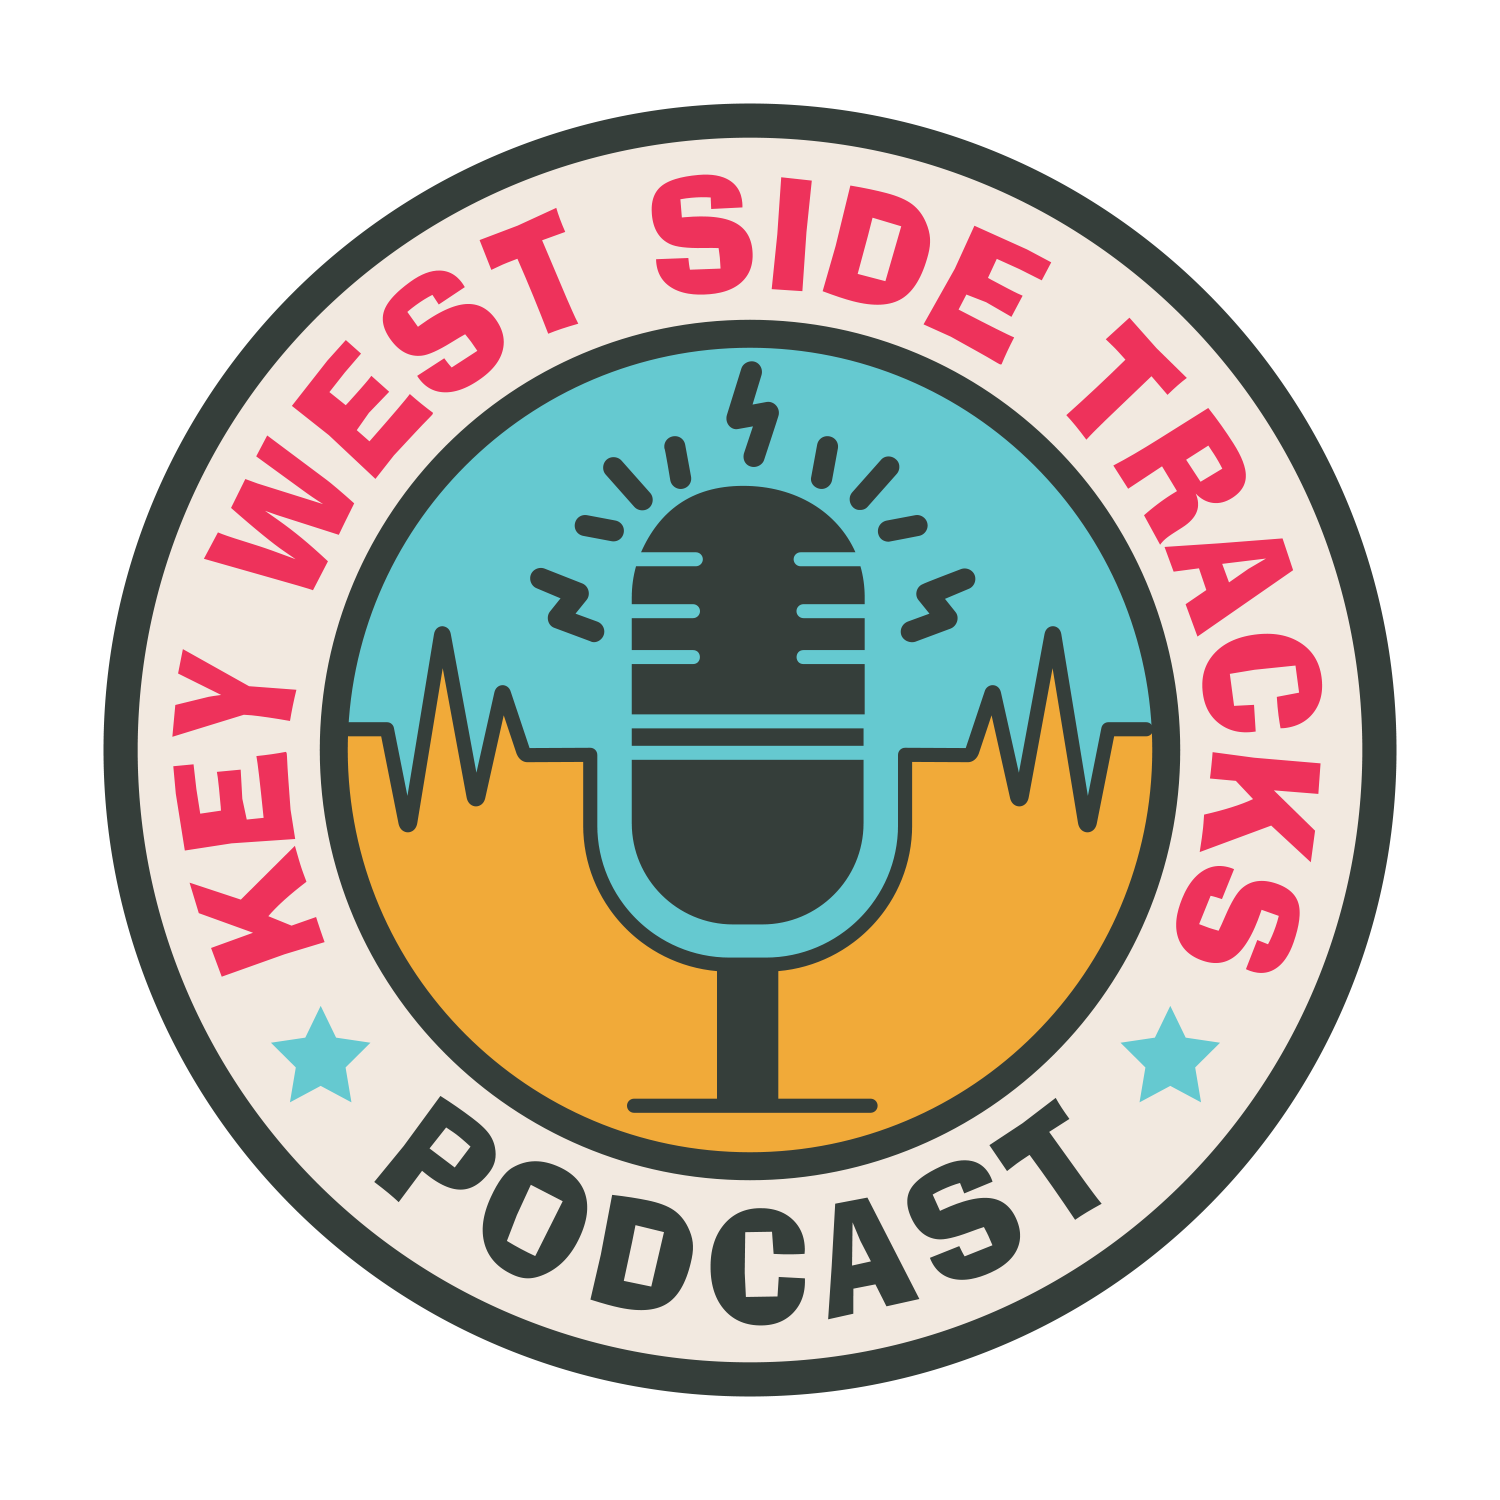 Michael Franti joins the new Key West Side Tracks podcast